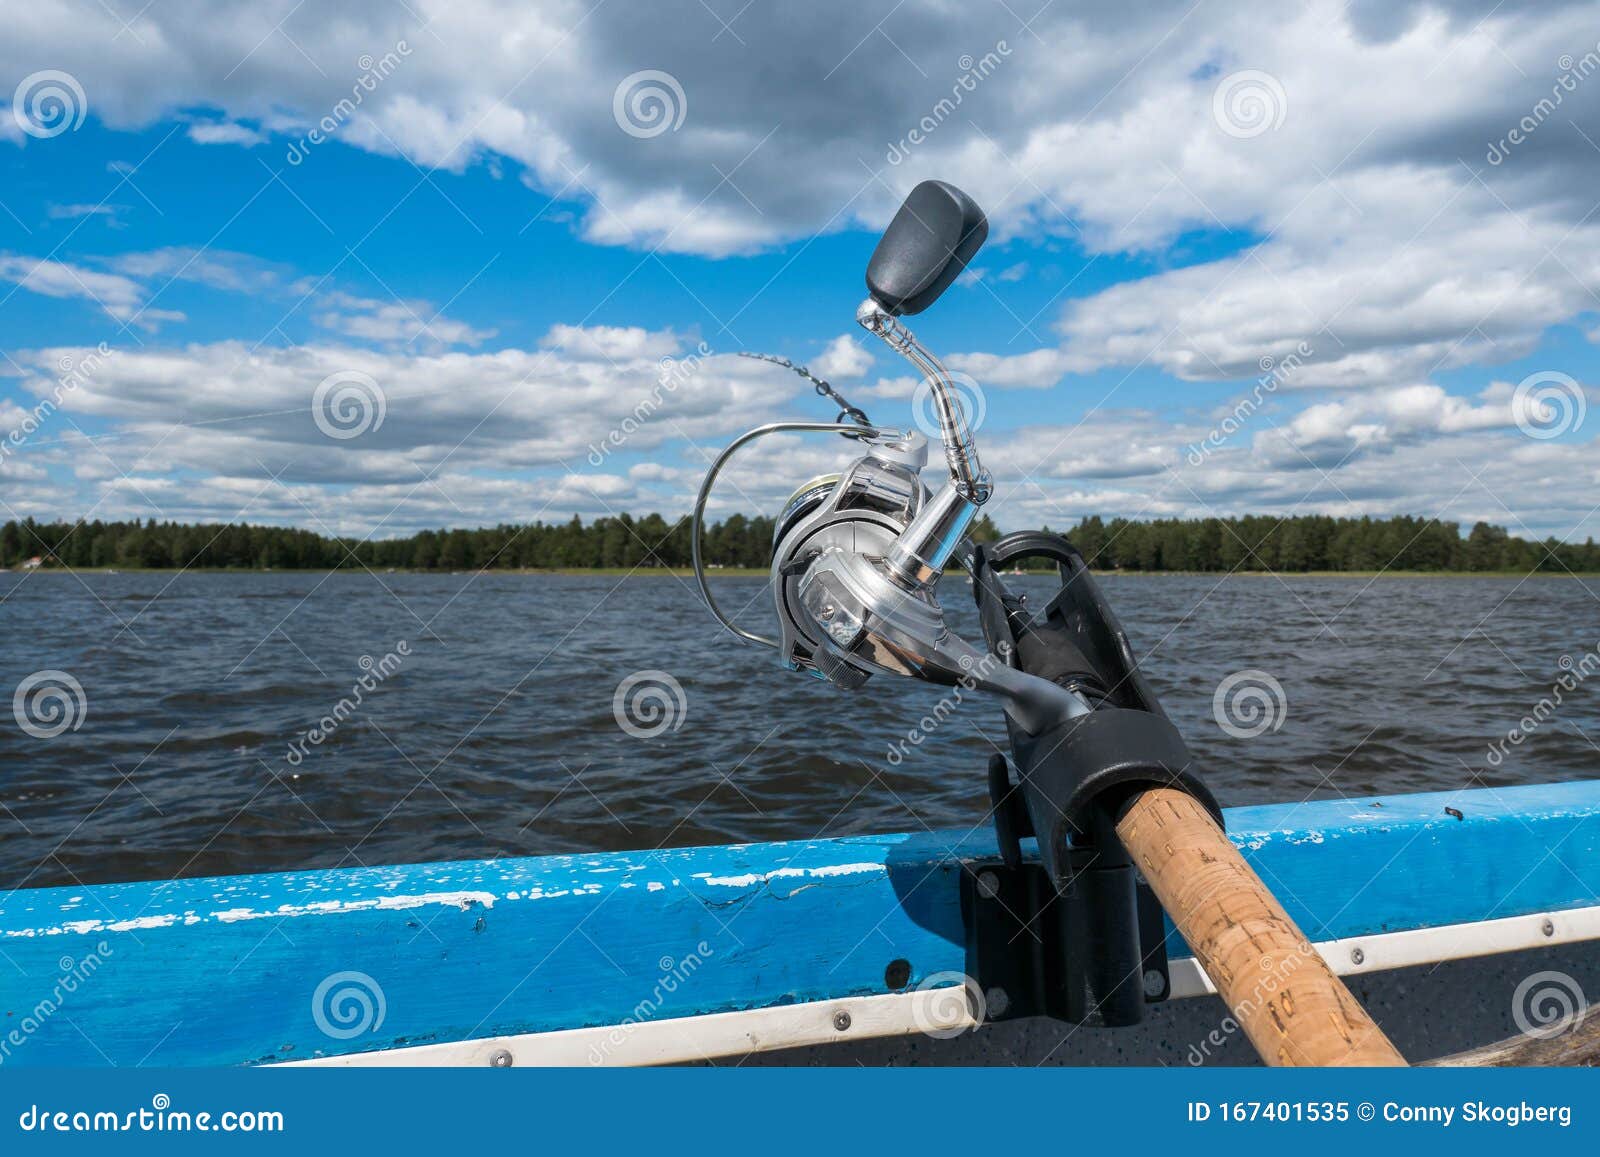 Rod and Reel on Boat Railing Trolling Stock Image - Image of